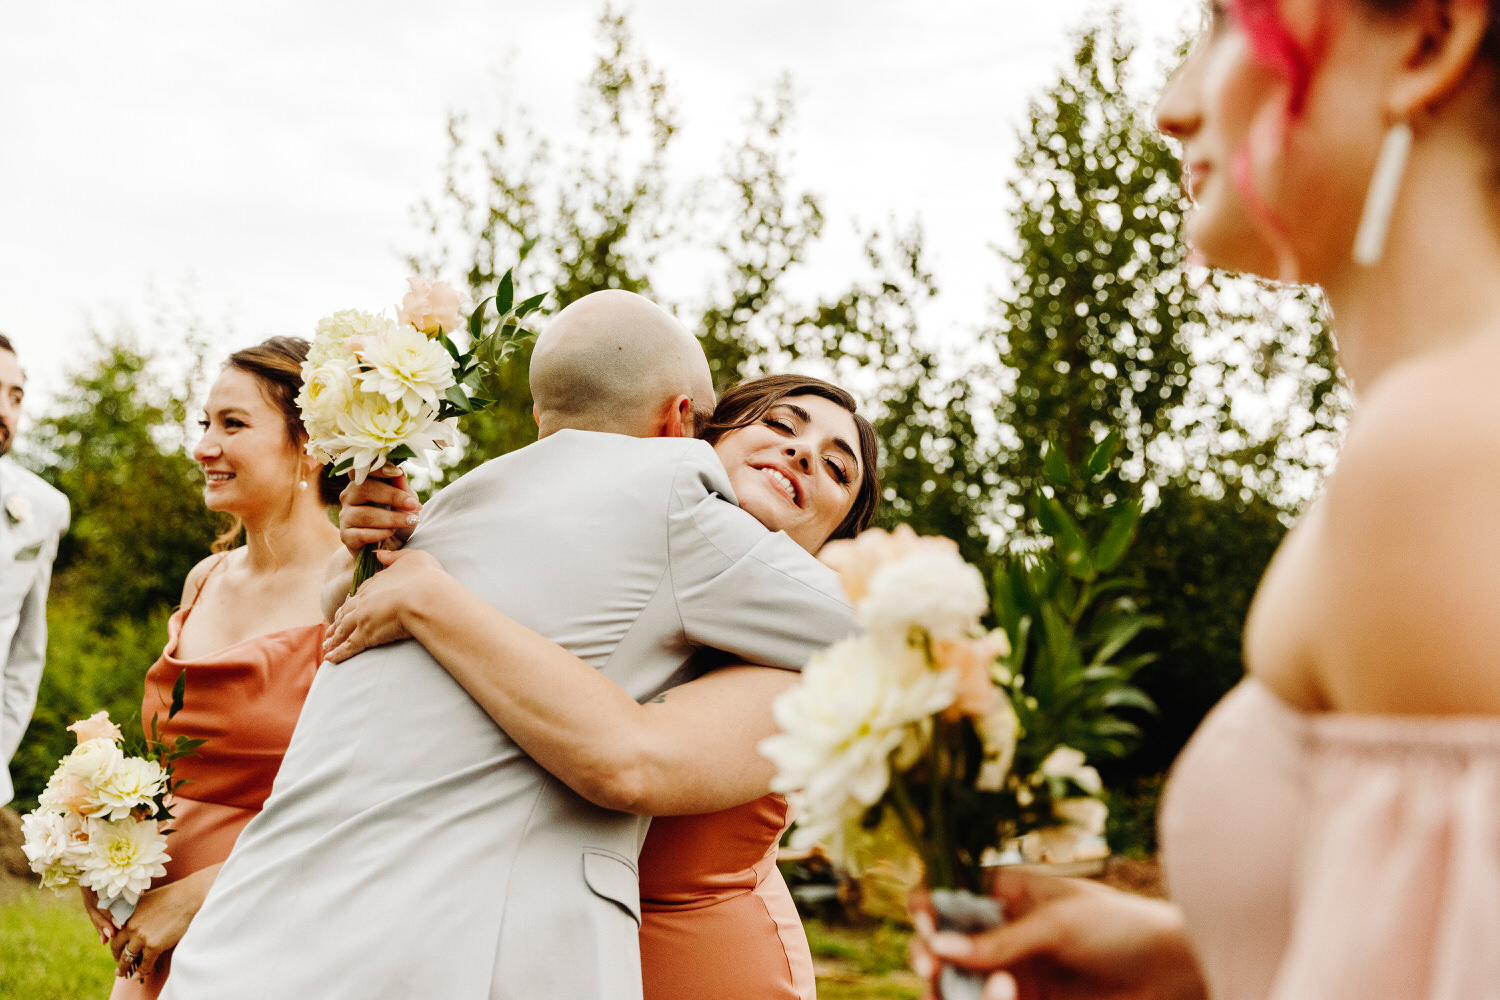 Groom hugs a bridesmaid after the wedding ceremony